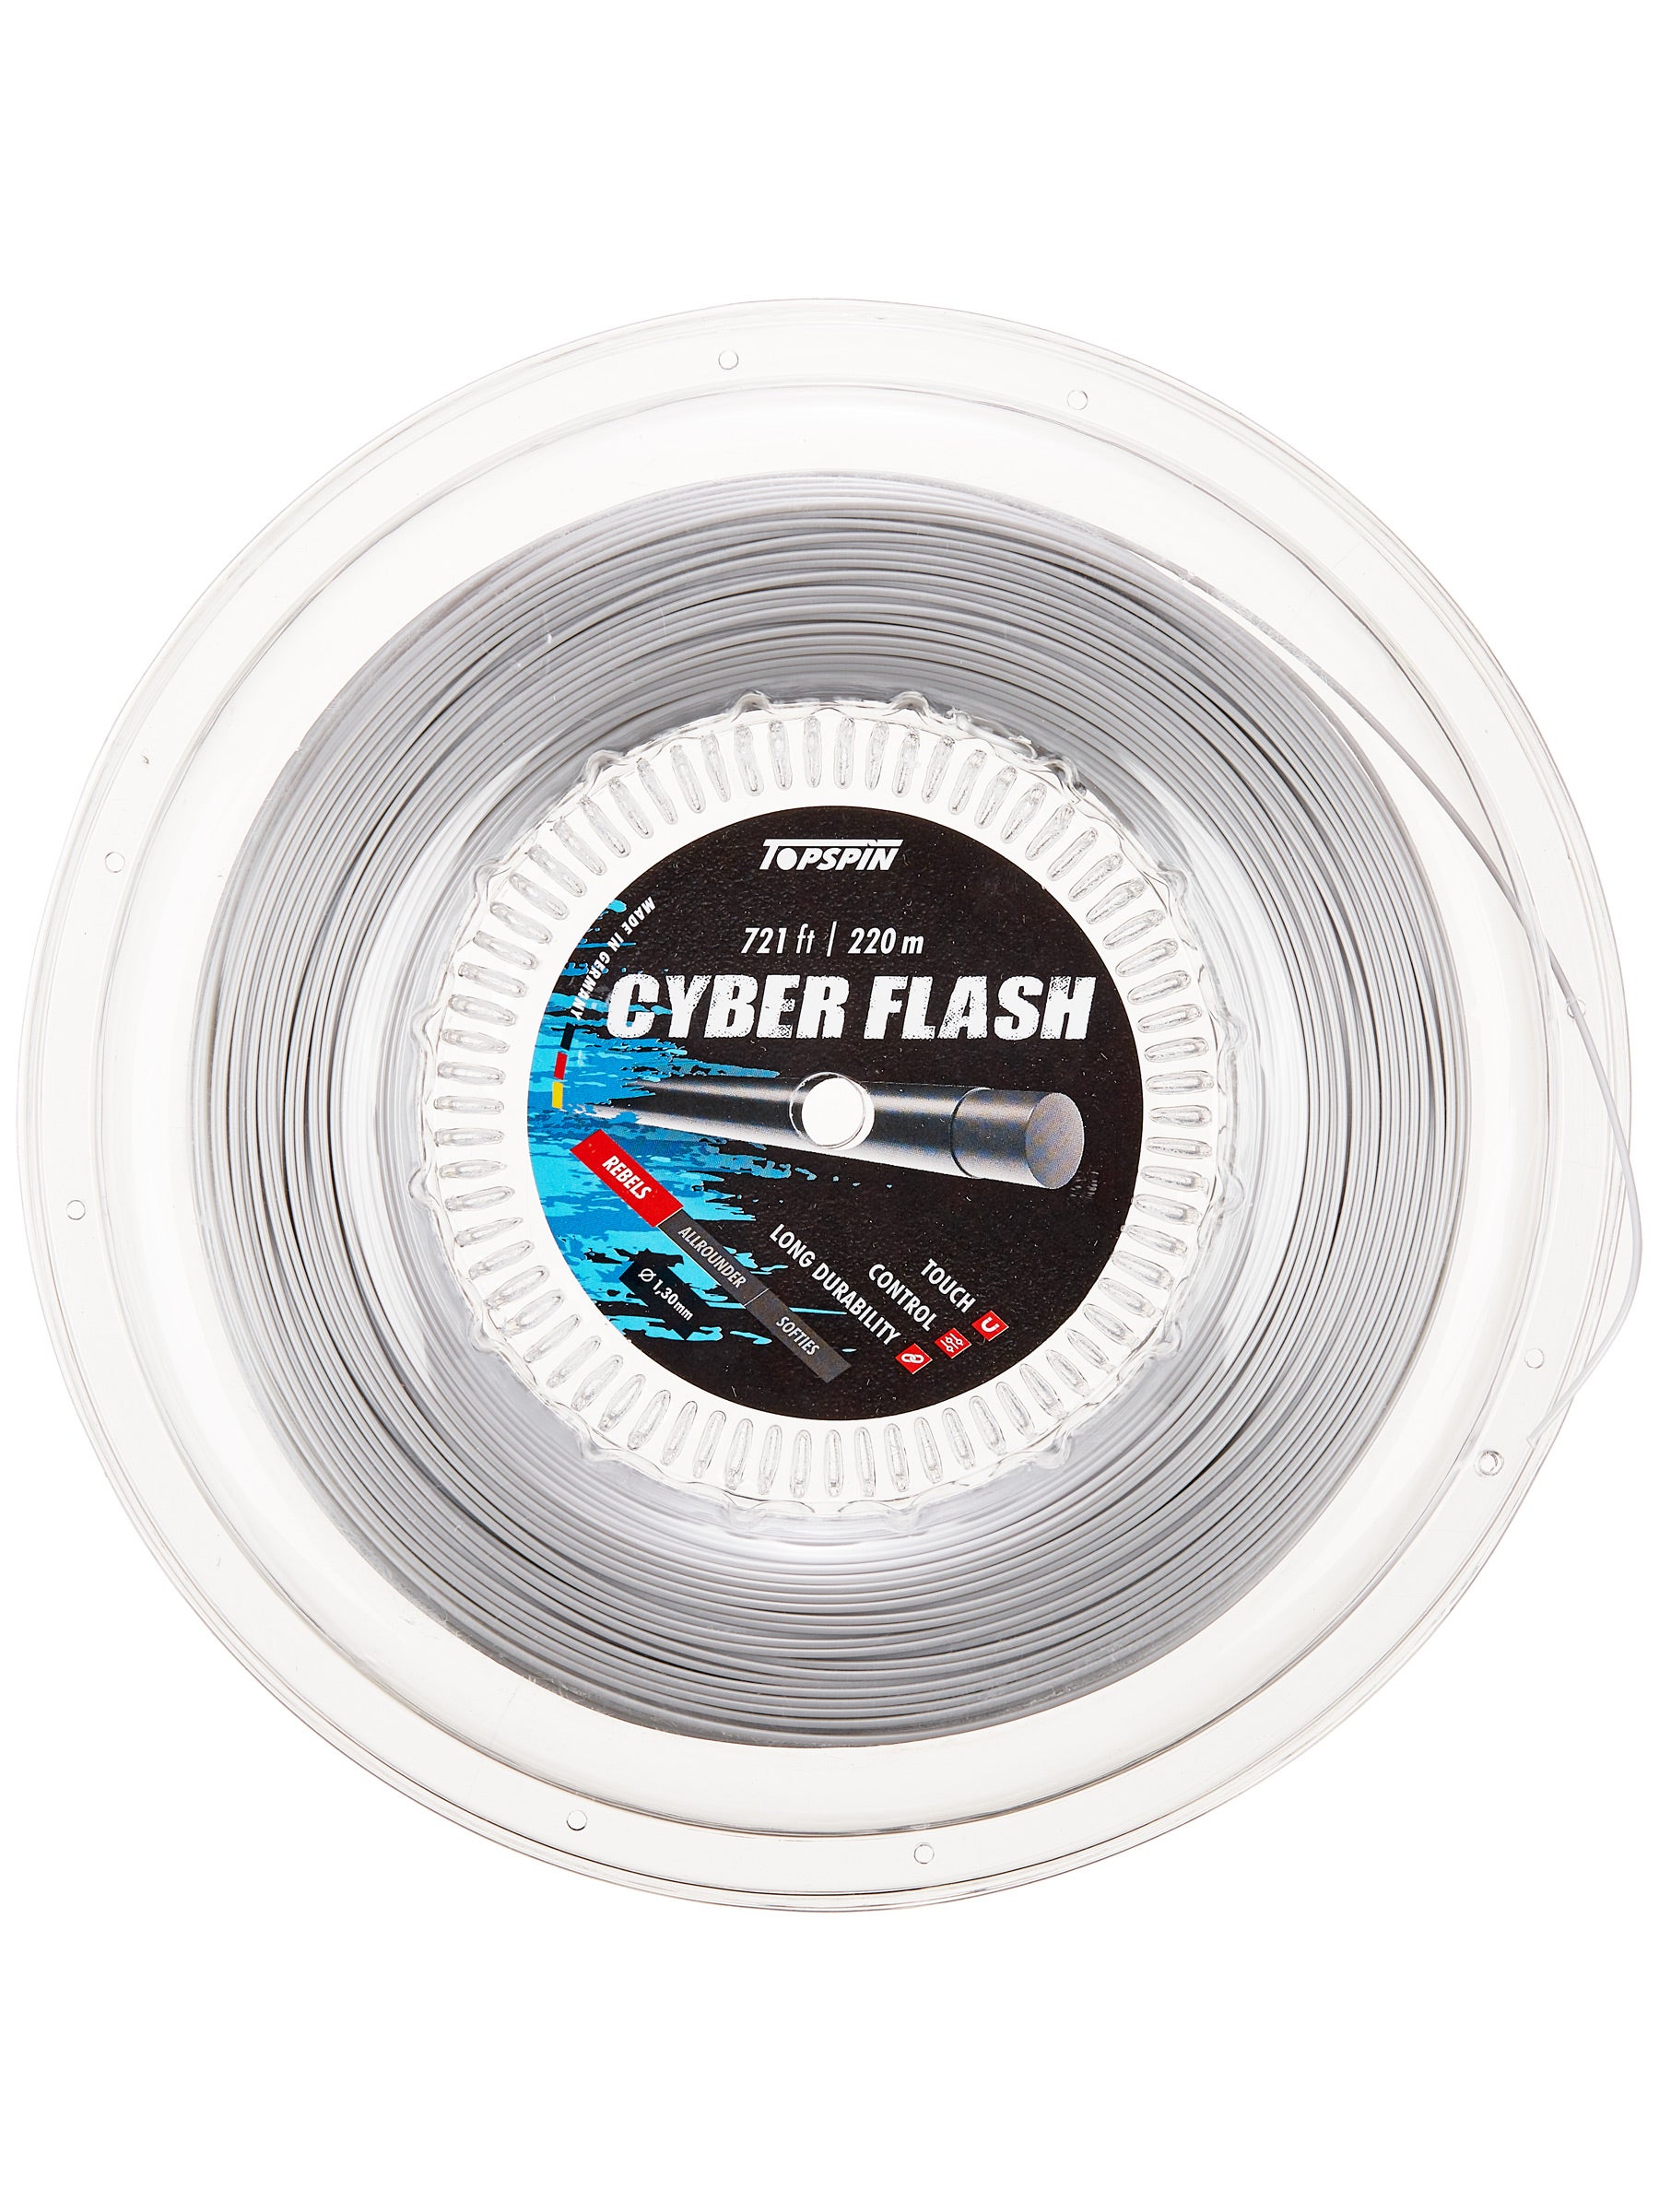 Topspin Cyber Flash 220 M 1,25 MM 3 Grips 